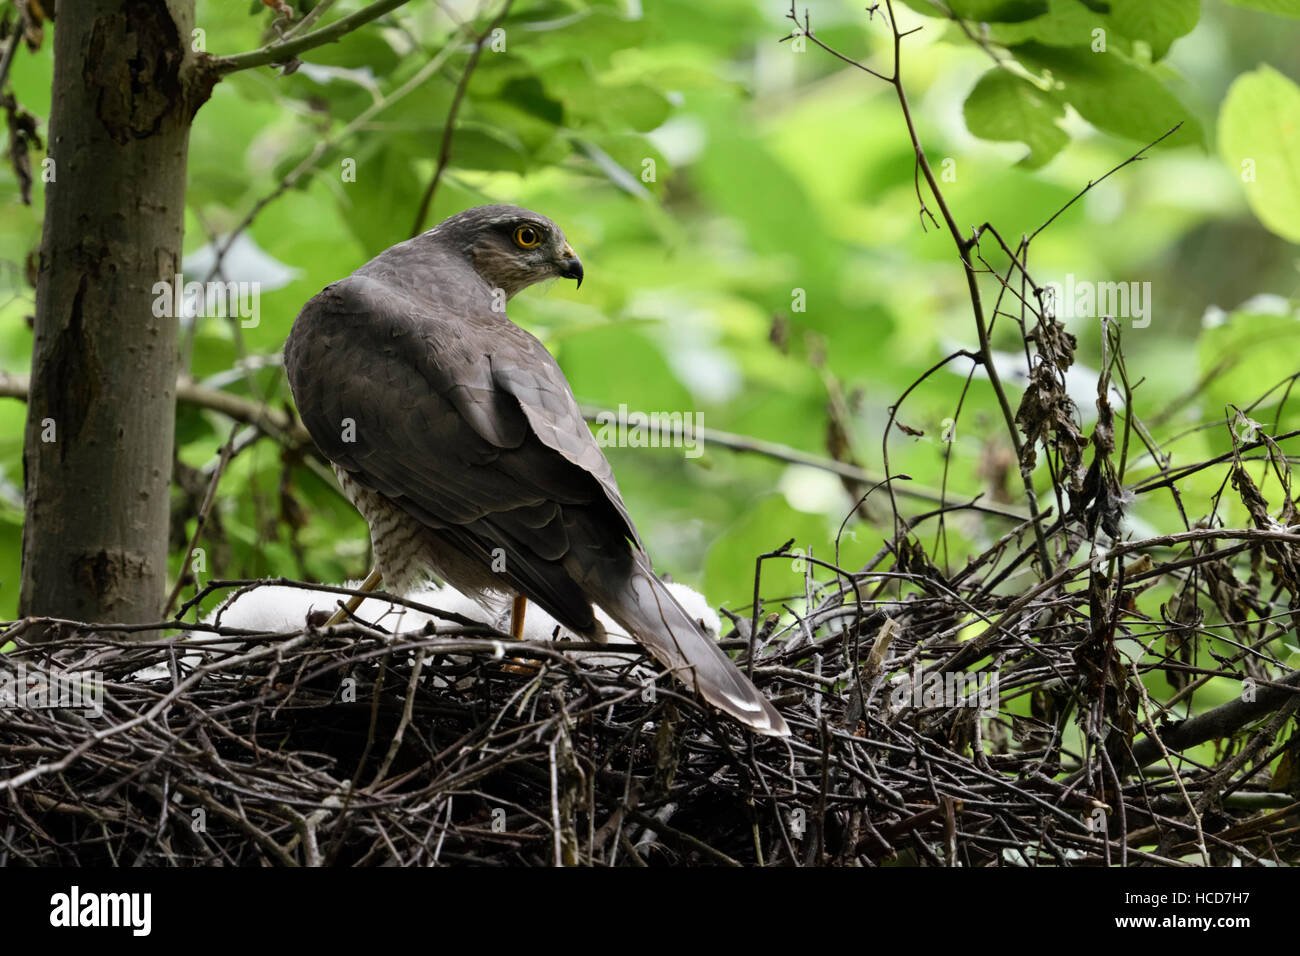 Sparrowhawk / Sperber ( Accipiter nisus ), female adult, standing on the edge of its nest, watching back over shoulder, backside view. Stock Photo